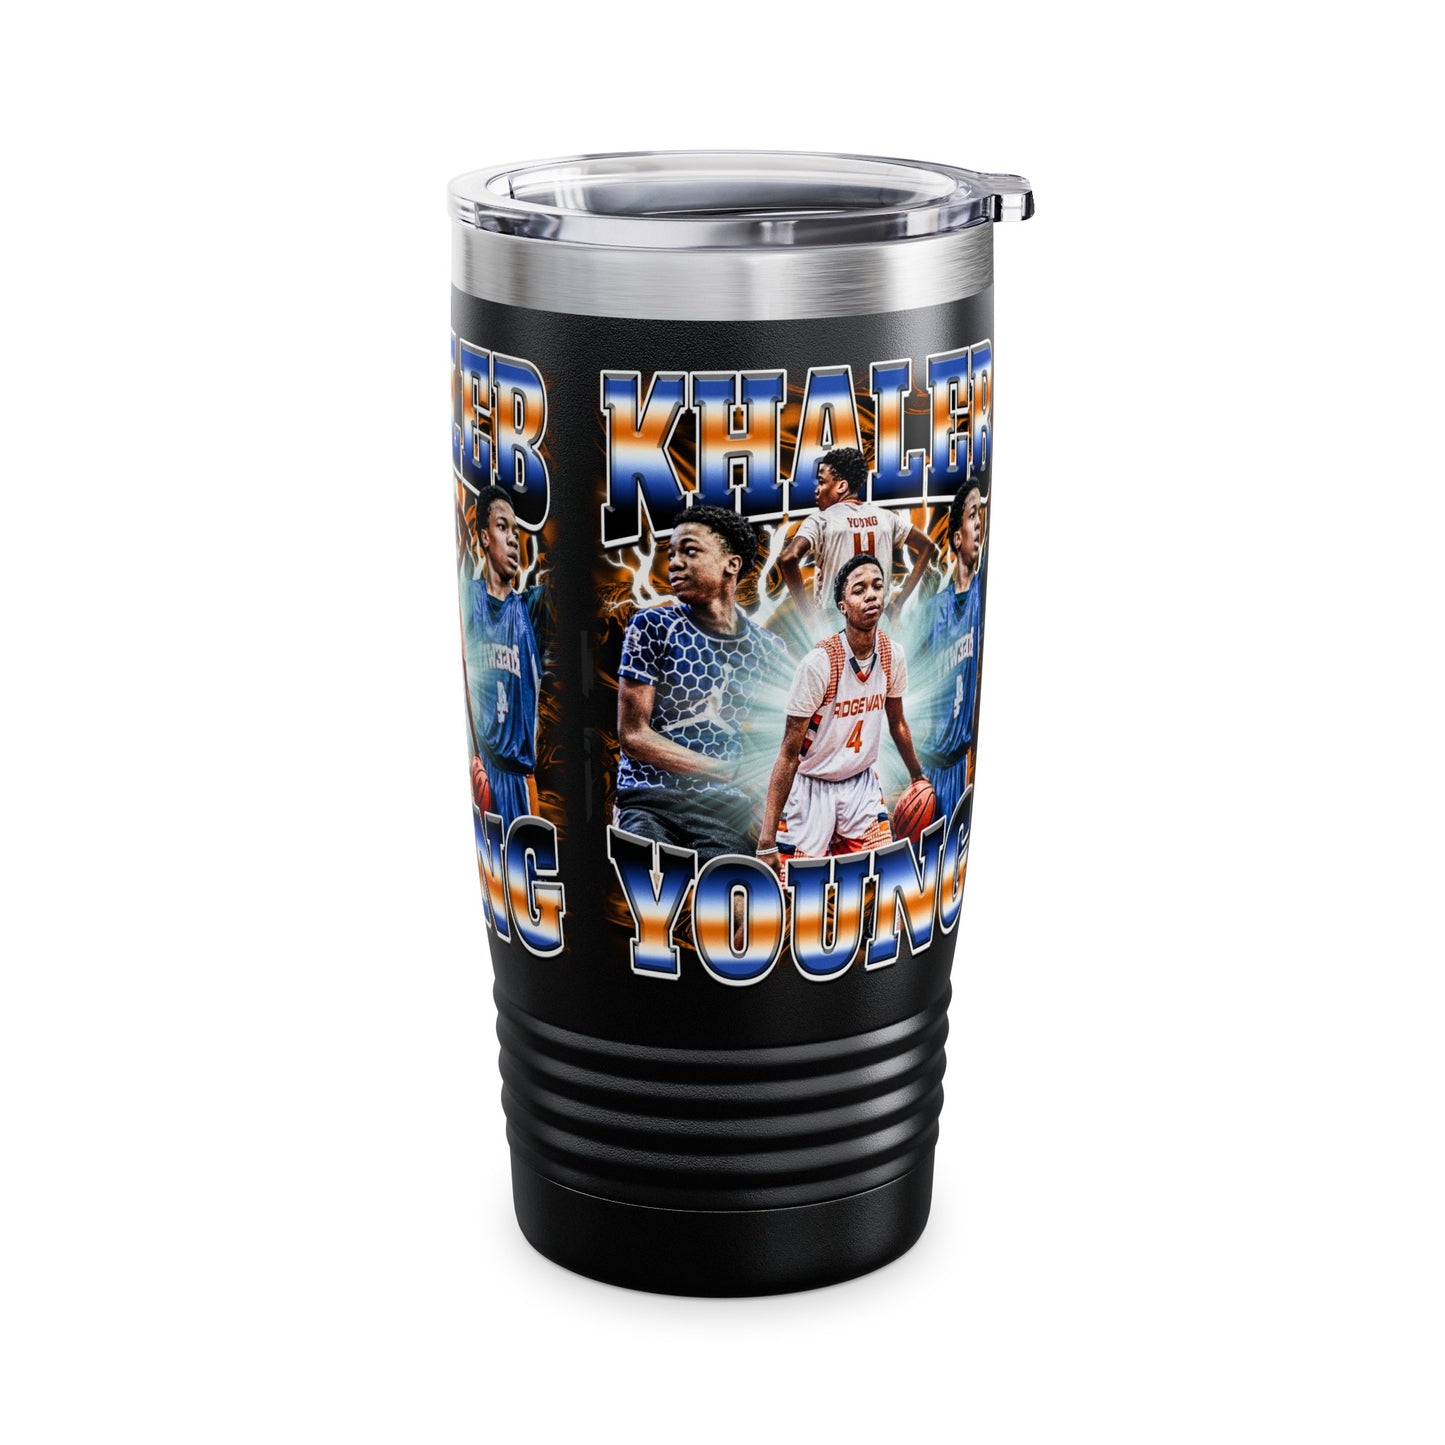 Khaleb Young Stainless Steal Tumbler